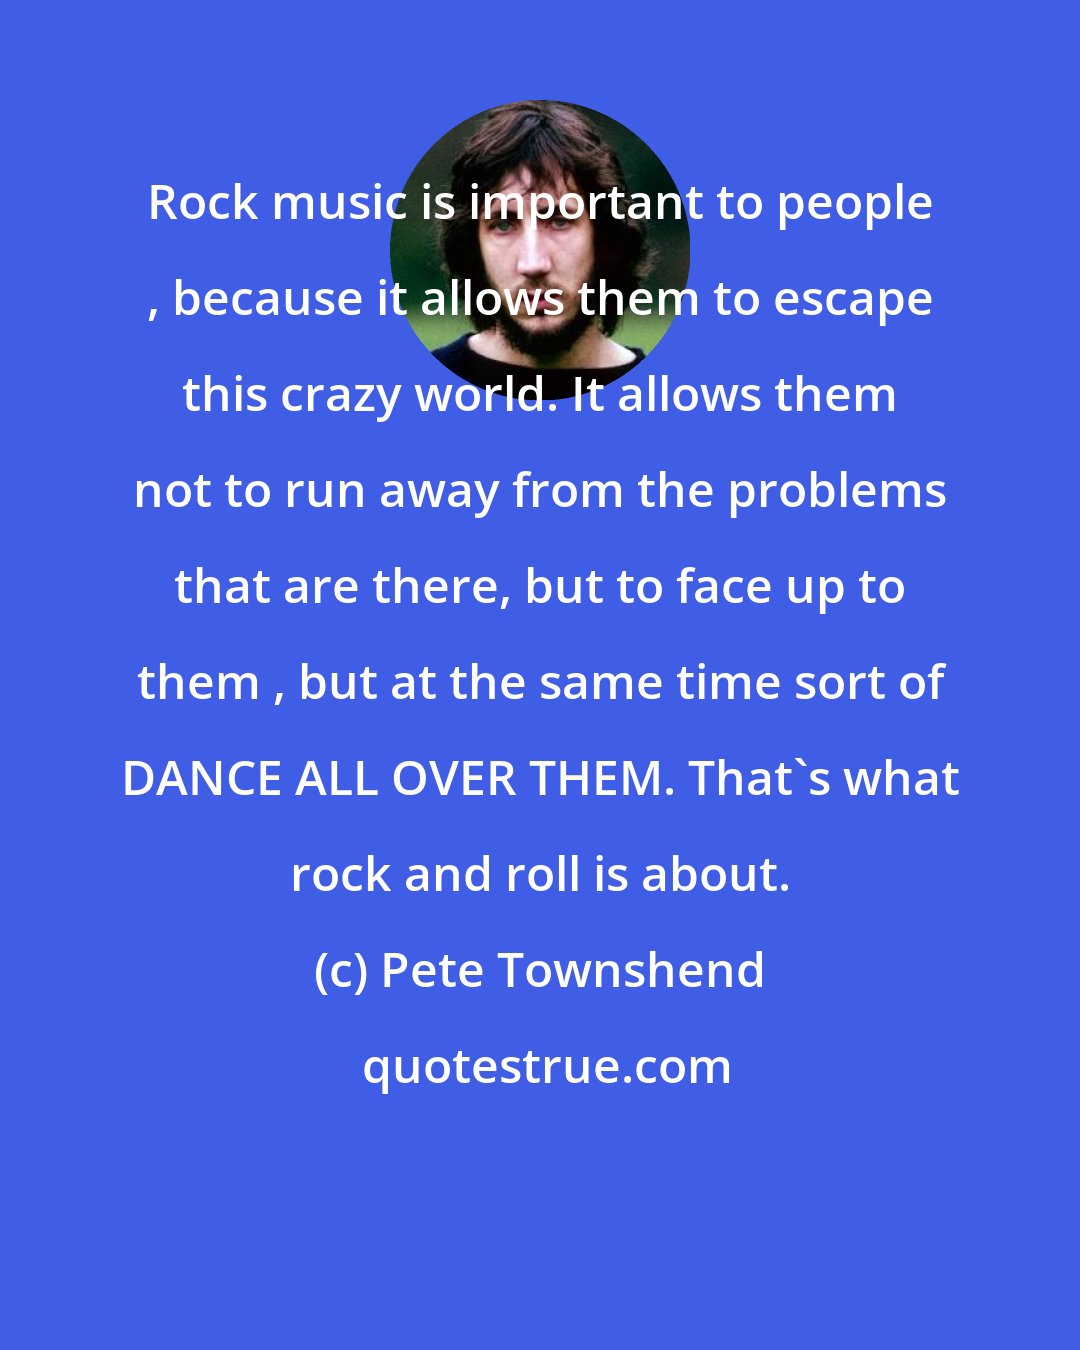 Pete Townshend: Rock music is important to people , because it allows them to escape this crazy world. It allows them not to run away from the problems that are there, but to face up to them , but at the same time sort of DANCE ALL OVER THEM. That's what rock and roll is about.